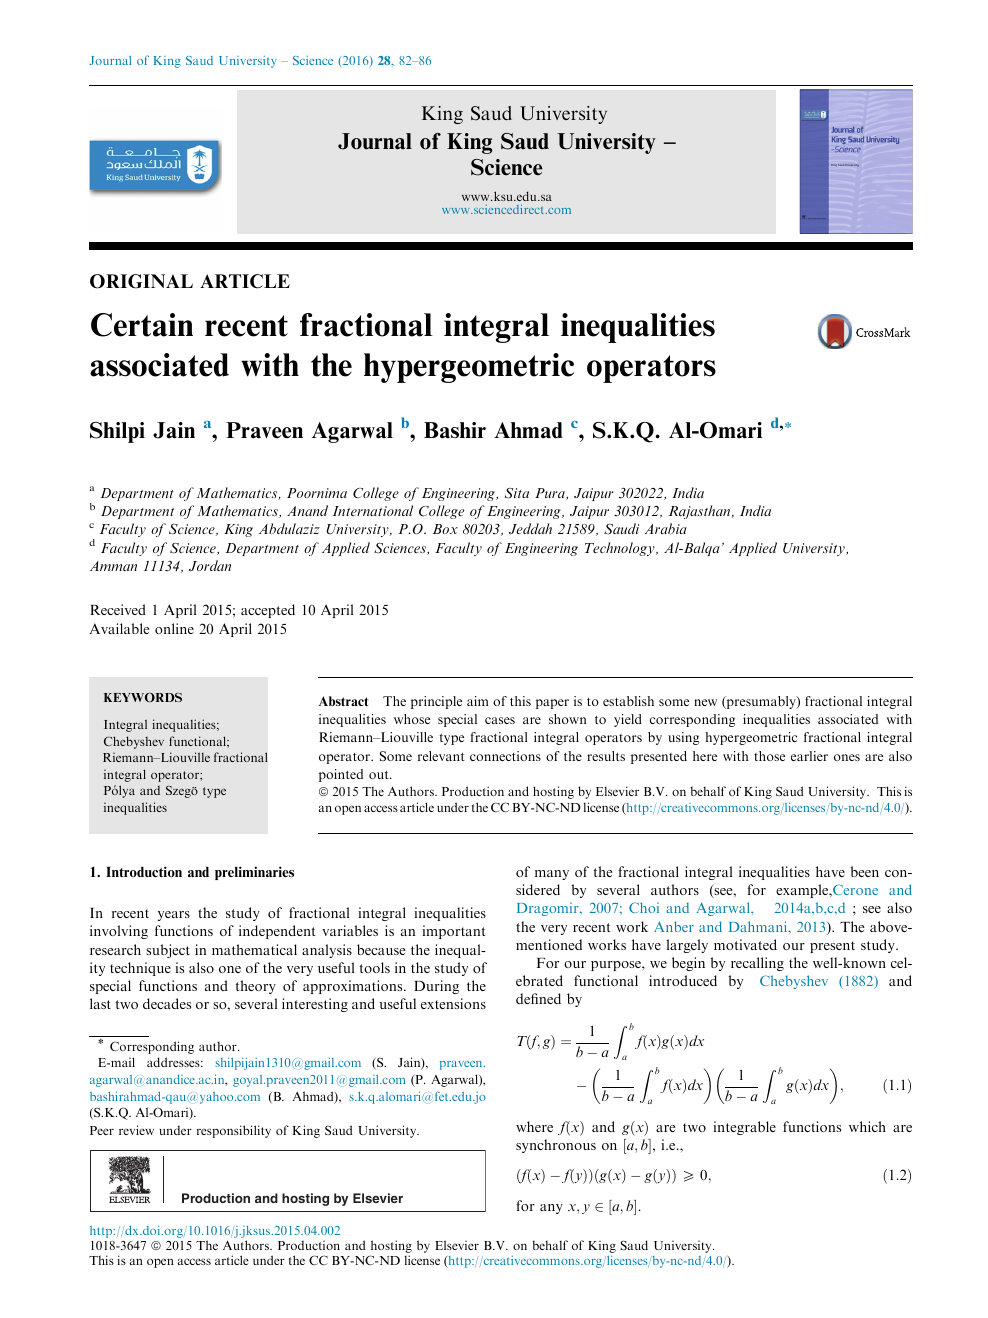 Certain Recent Fractional Integral Inequalities Associated With The Hypergeometric Operators Topic Of Research Paper In Mathematics Download Scholarly Article Pdf And Read For Free On Cyberleninka Open Science Hub